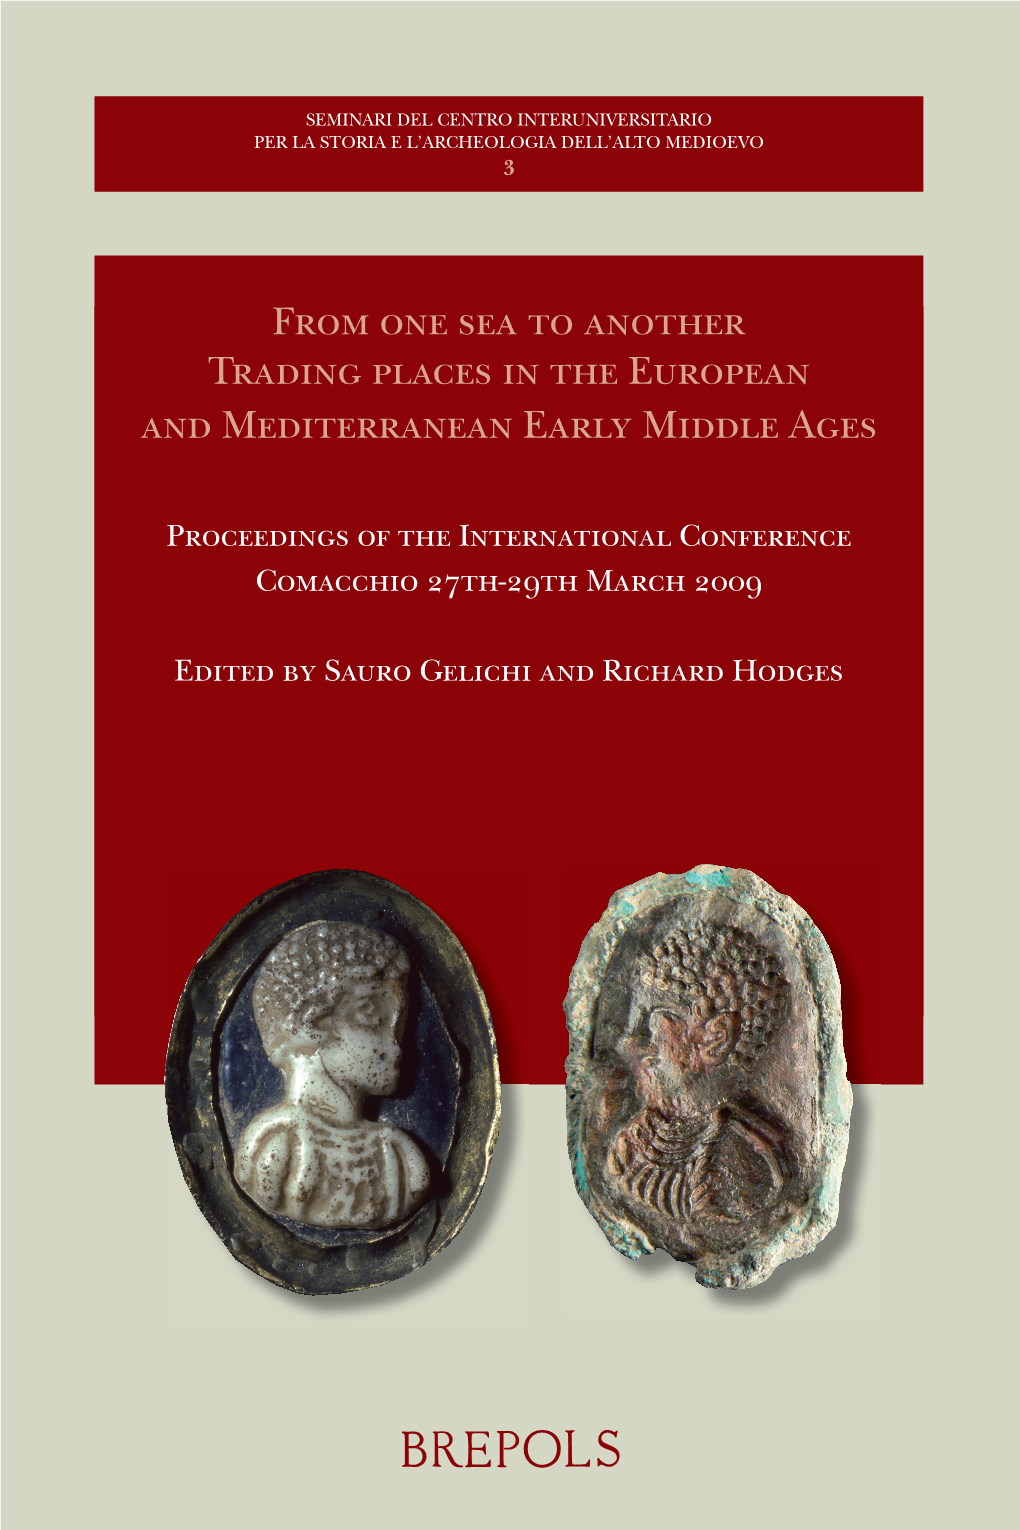 From One Sea to Another Trading Places in the European and Mediterranean Early Middle Ages